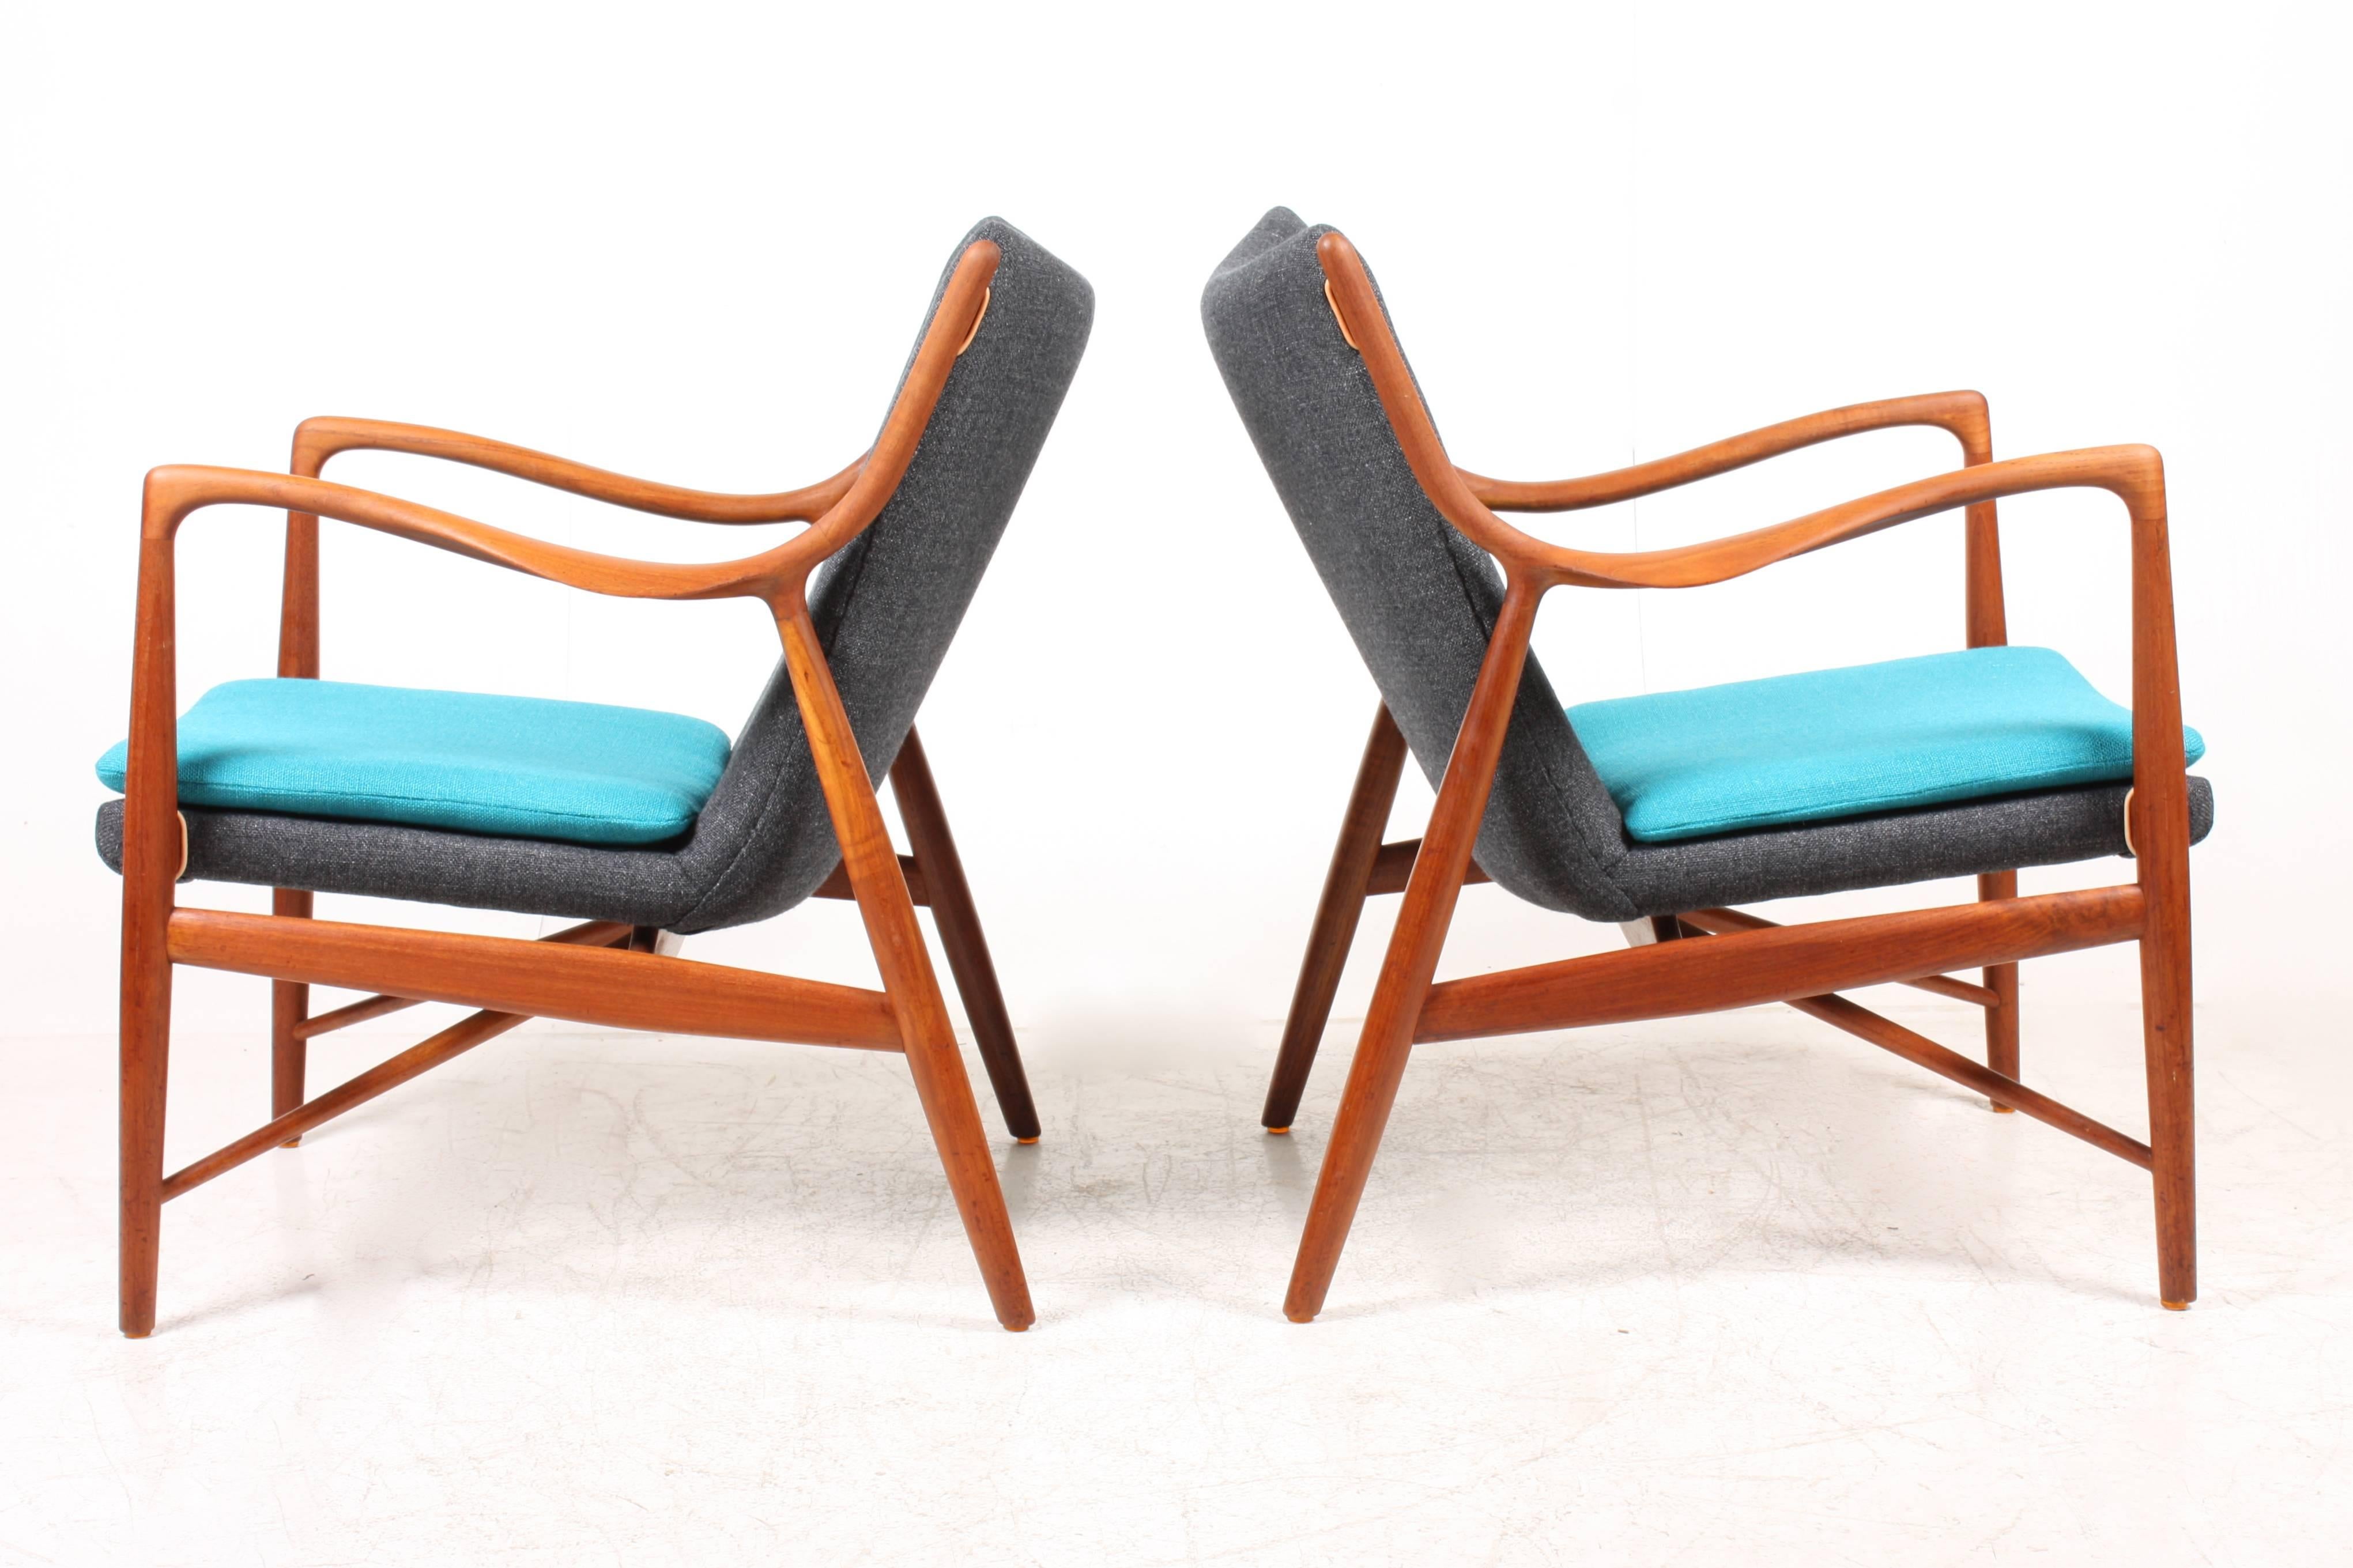 Pair of NV45 lounge chairs in teak with new fabric upholstery. Designed by Maa. Finn Juhl for Niels Vodder cabinetmakers in 1945. Made in Denmark. Great condition.